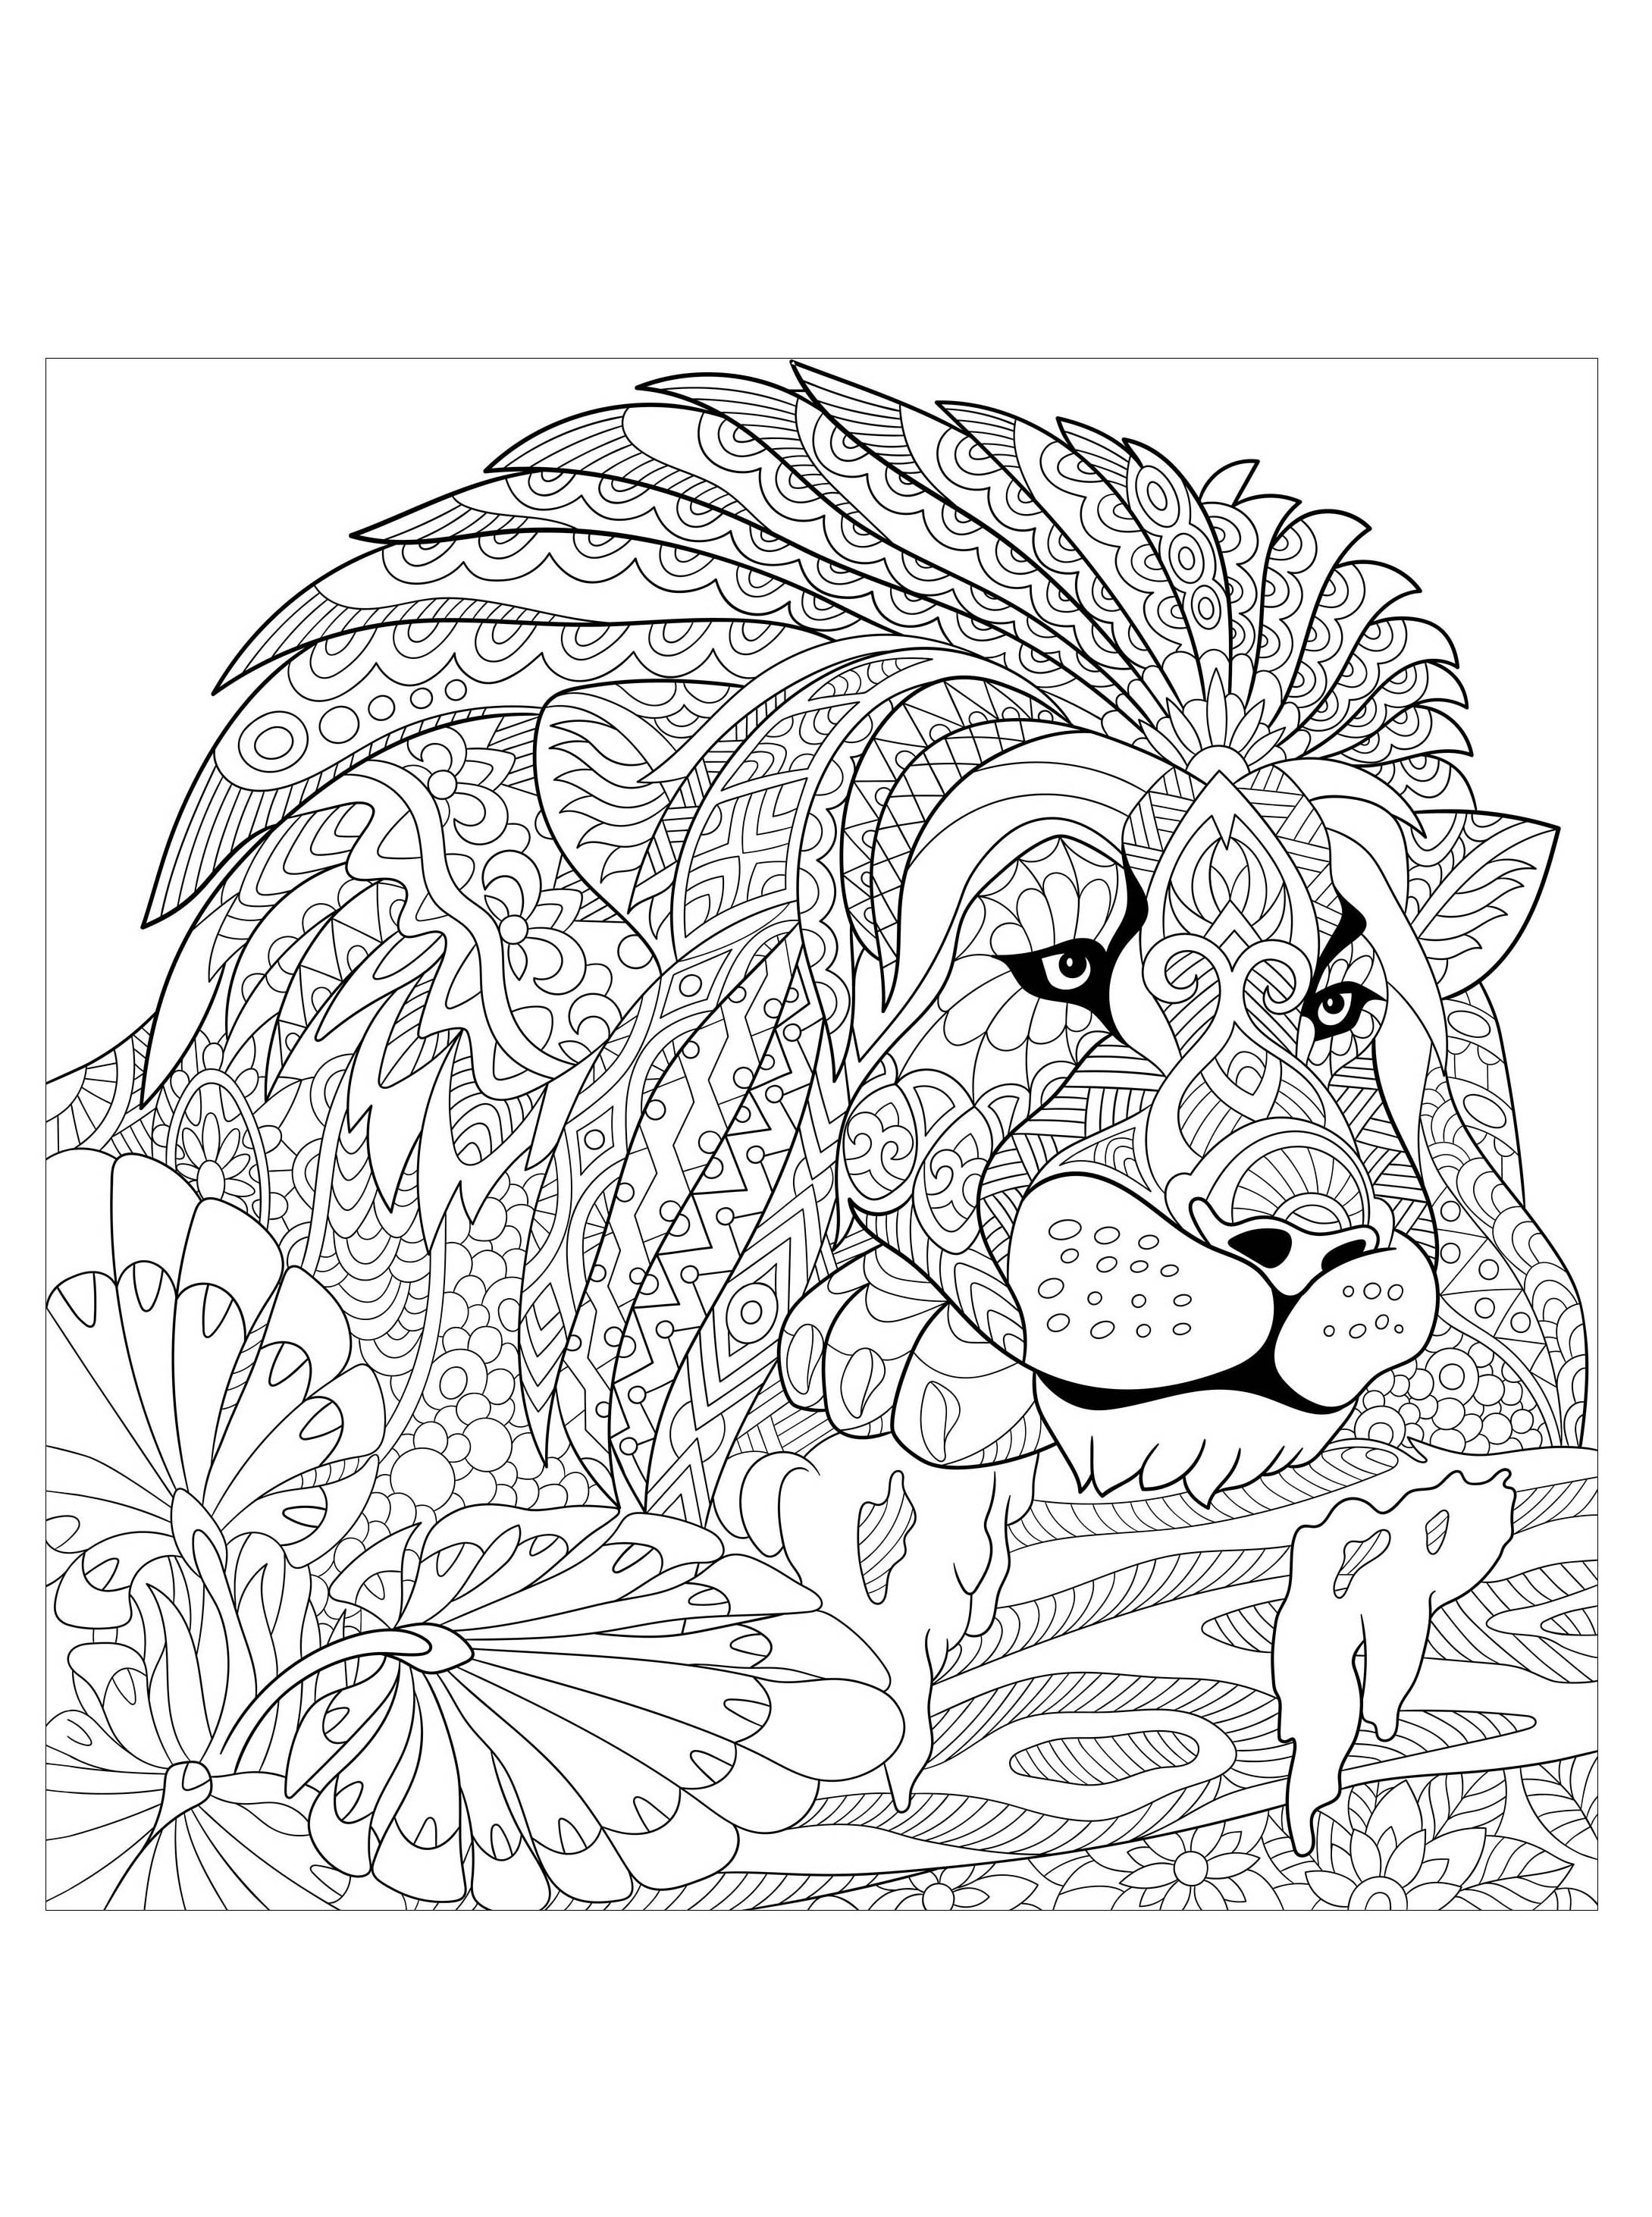 Lion king with patterns - Lions Adult Coloring Pages